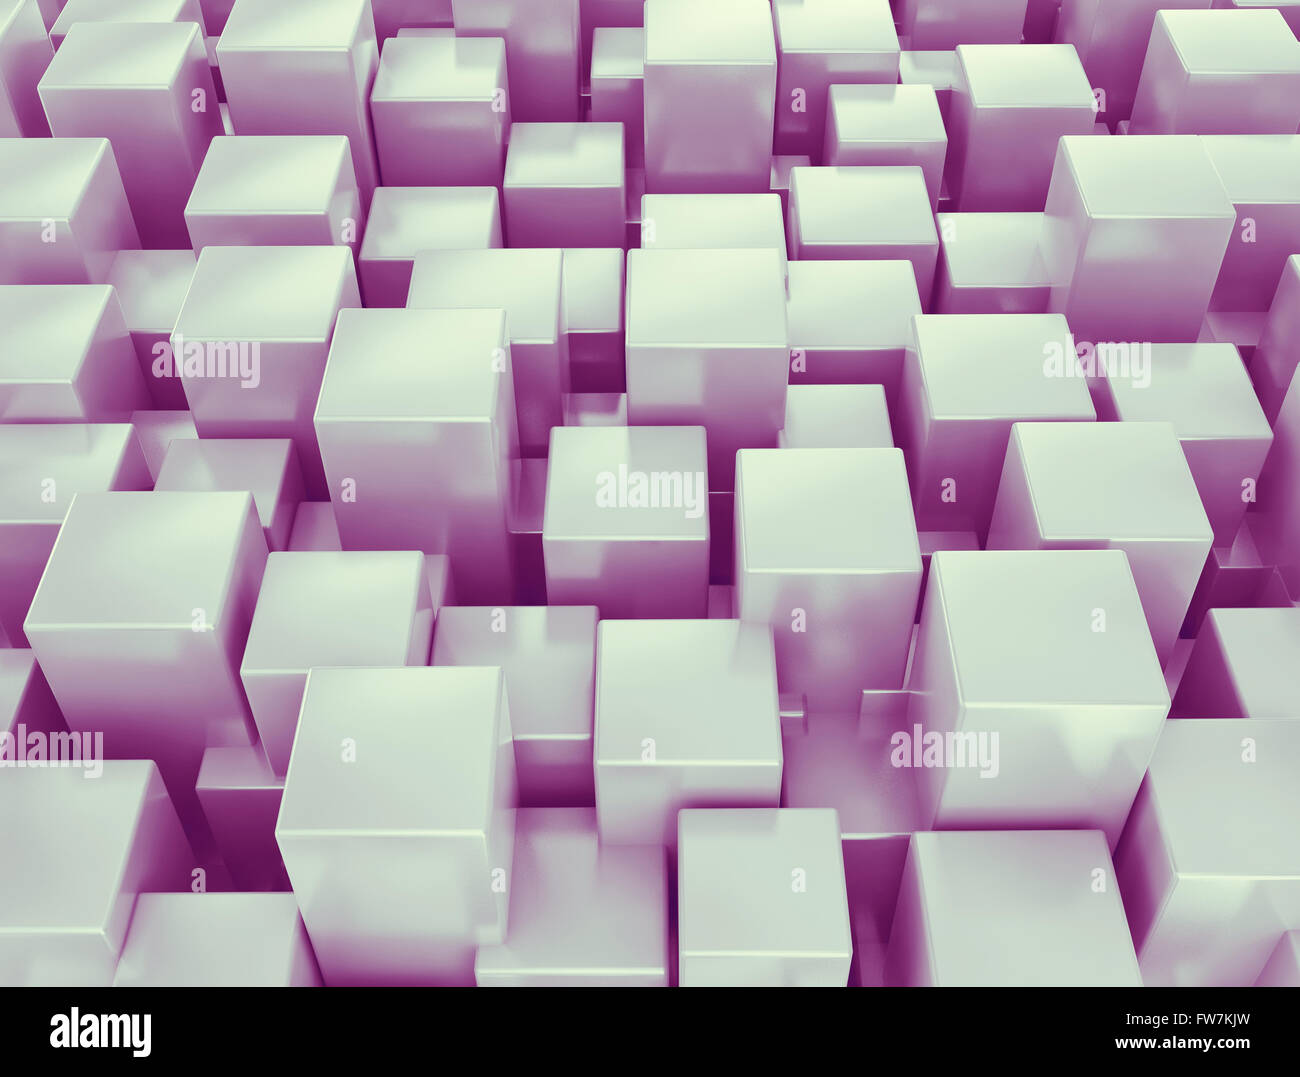 Abstract metallic 3d cubes background Stock Photo